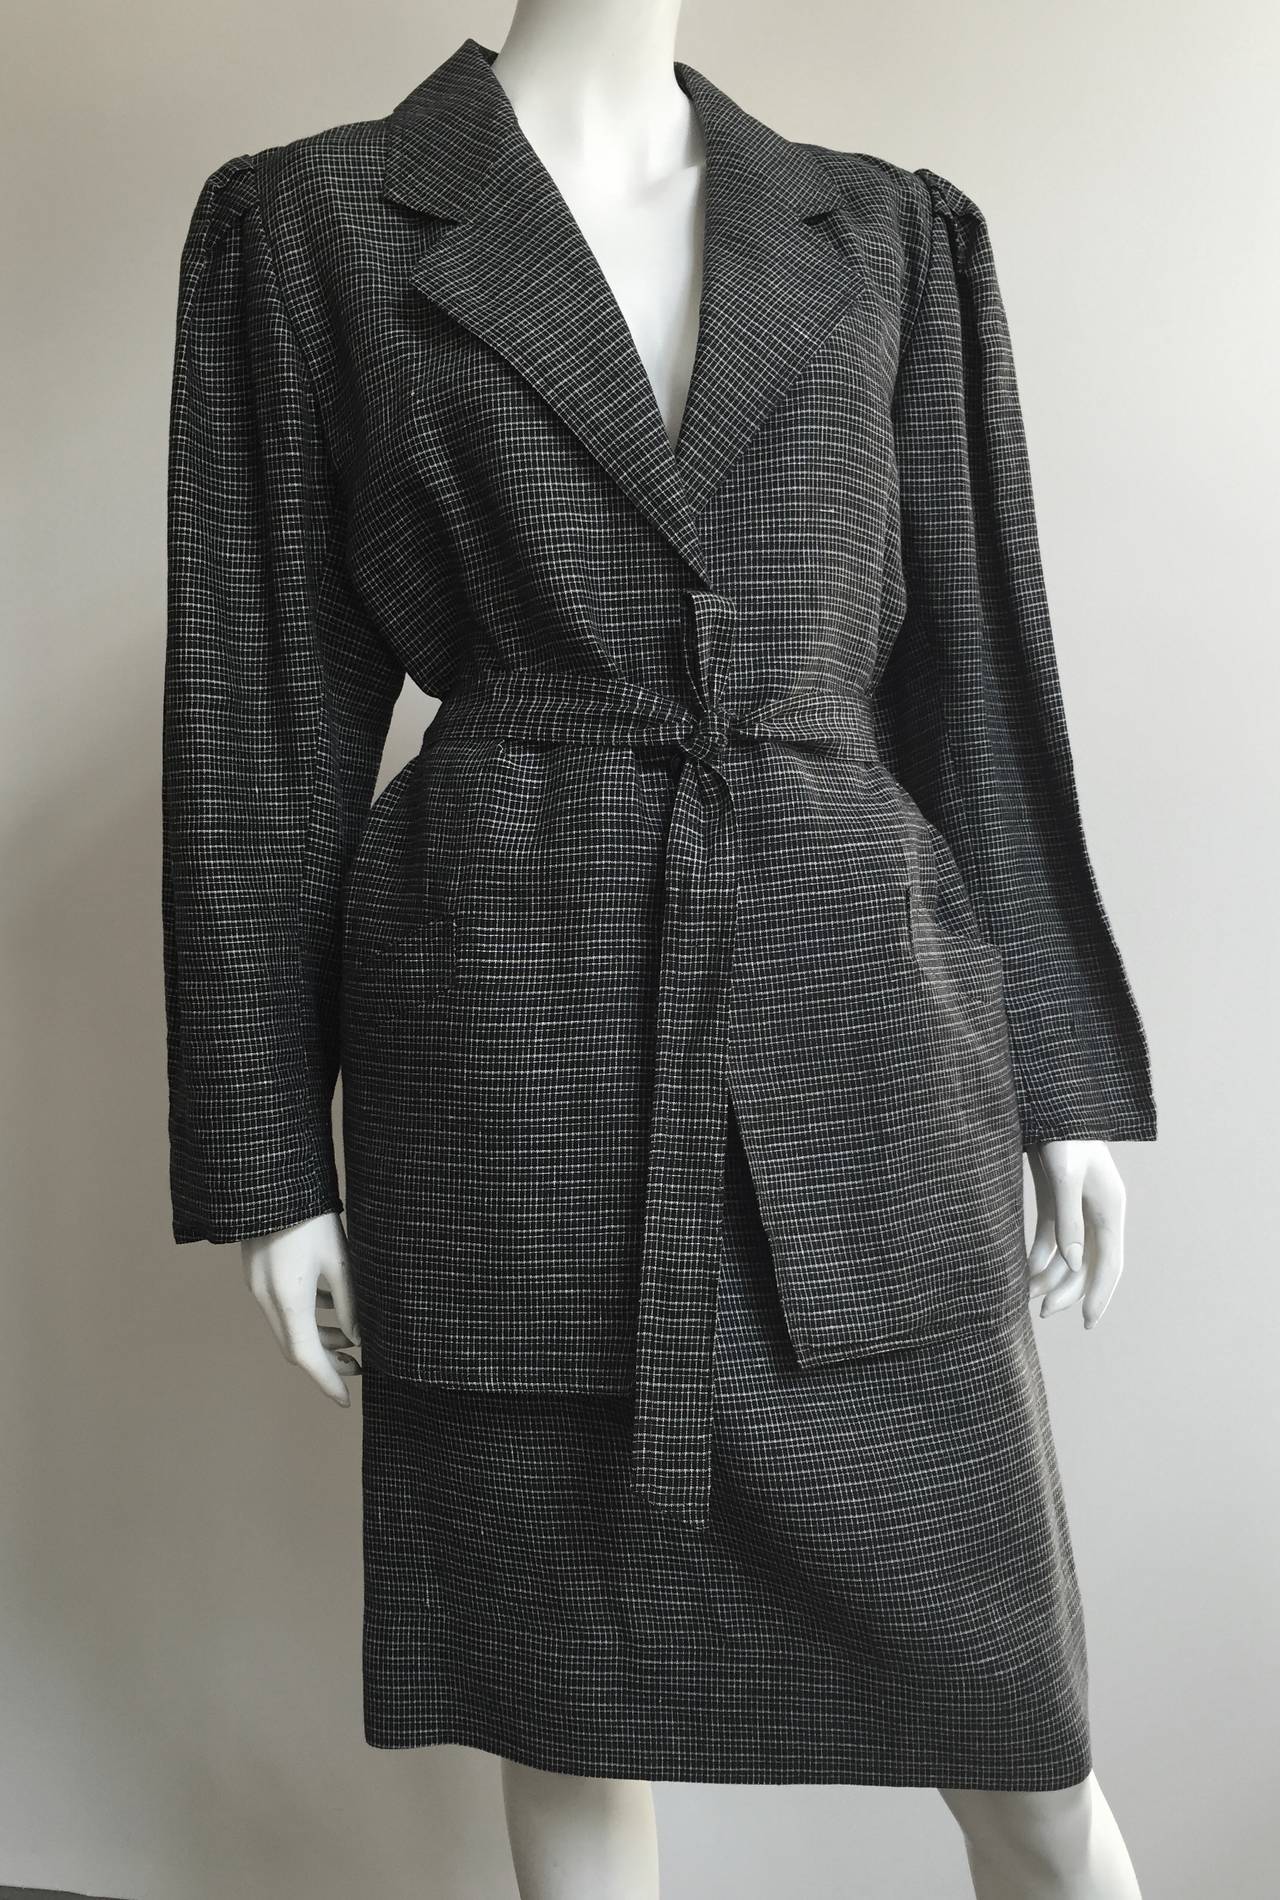 Ungaro Linen Skirt Suit with Pockets and Belt Size 6  For Sale 5